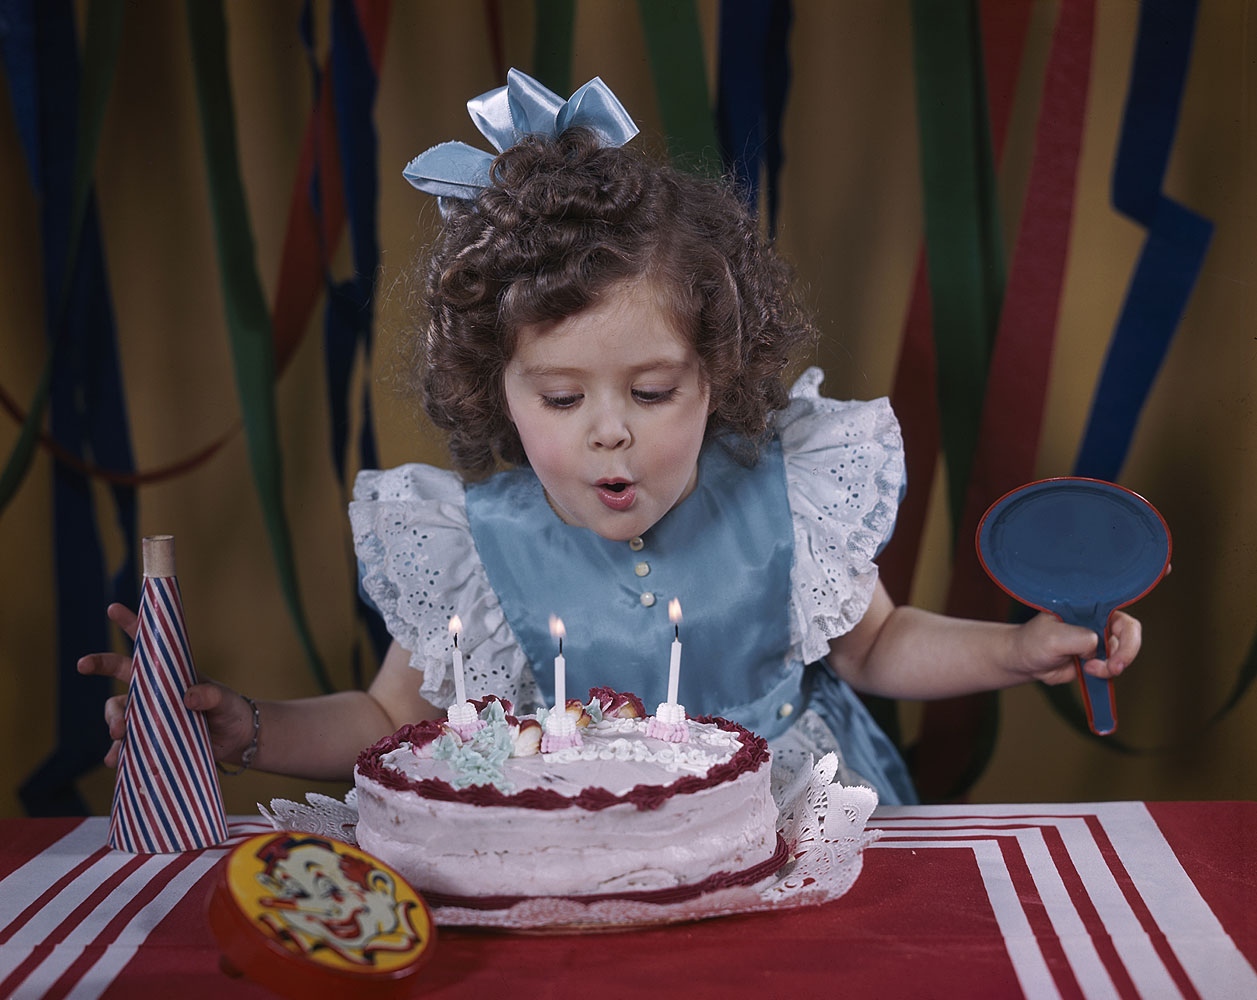 Blowing Out Candles On Birthday Cake Is So Germy, You'll Wish You Hadn't -  CBS San Francisco